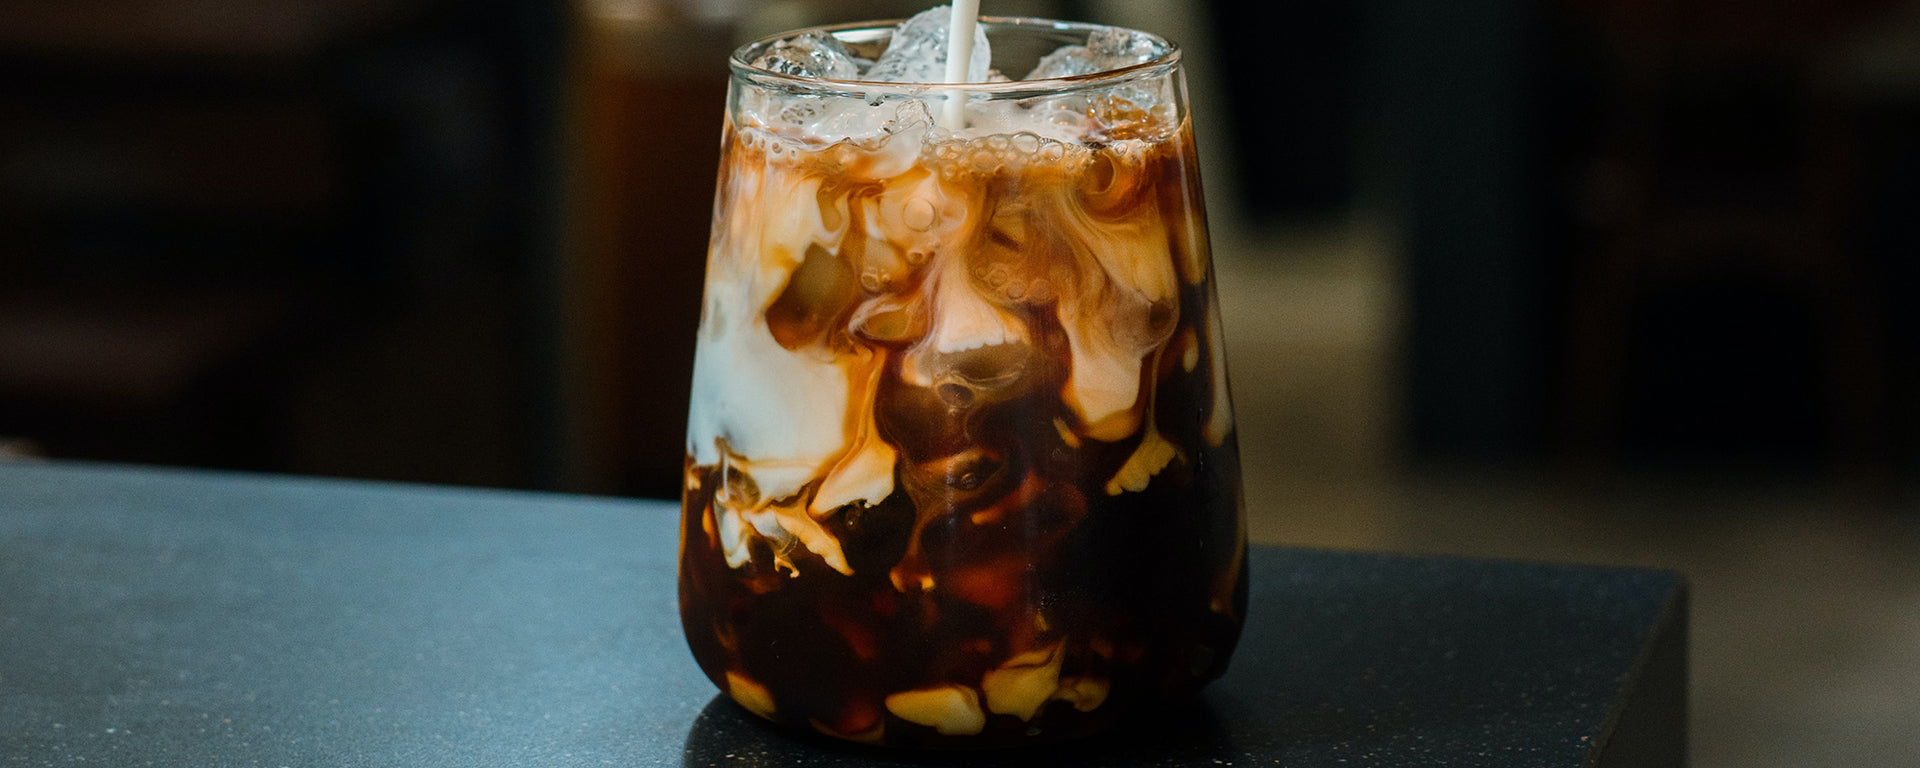 How to Make Iced Coffee at Home, Trade Coffee